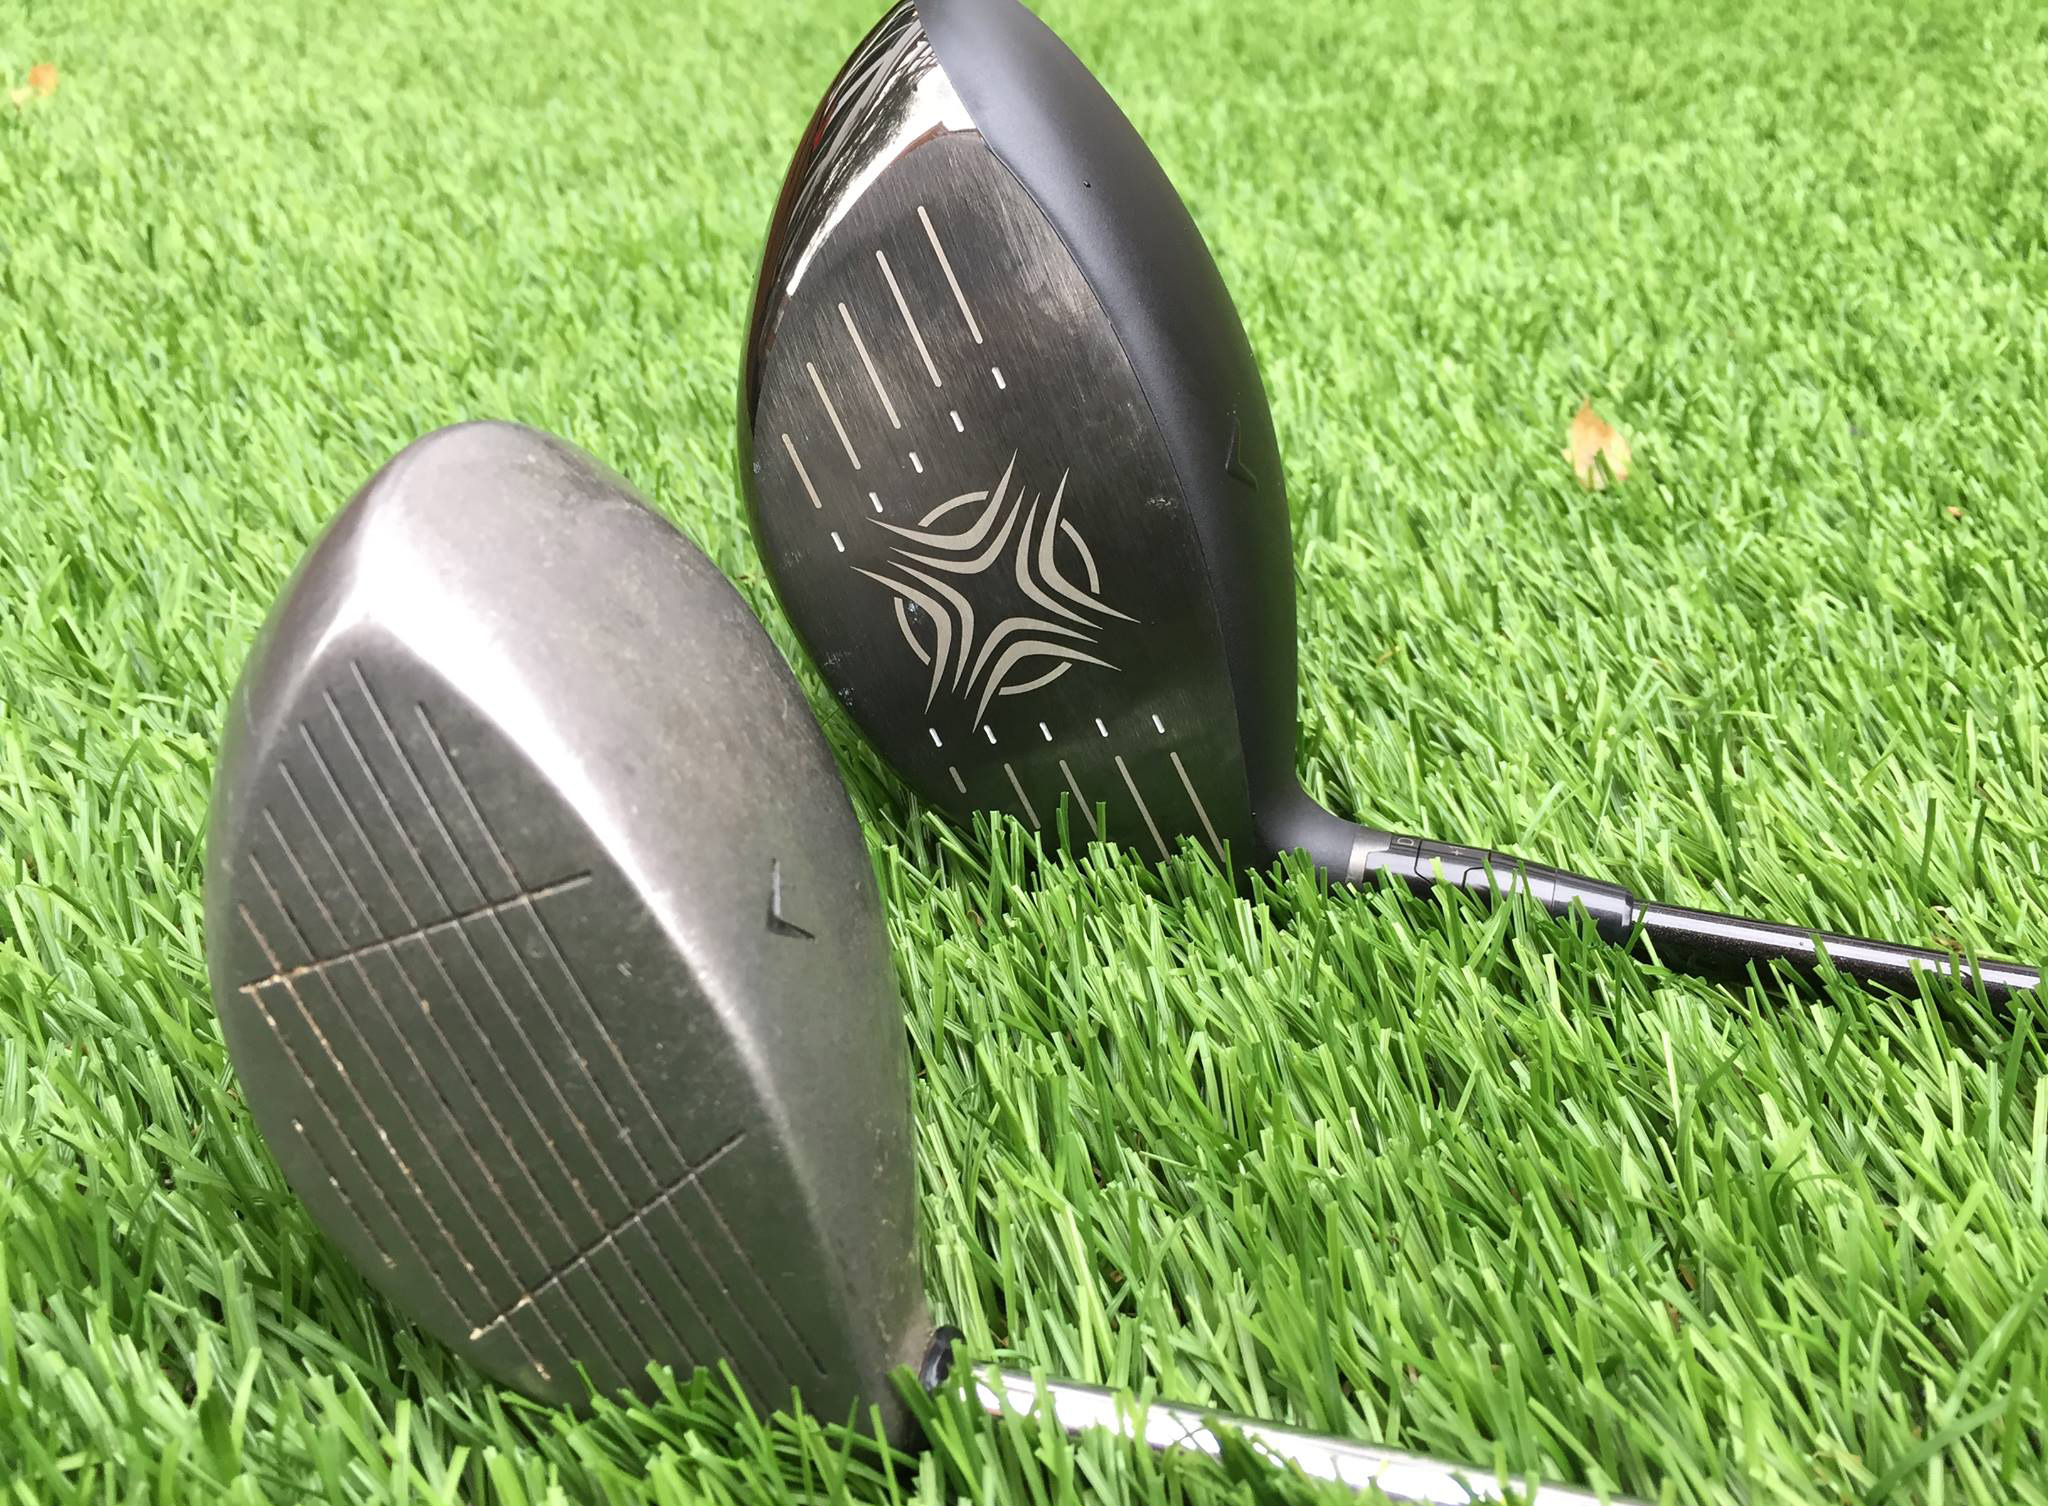 The new Great Big Bertha driver features new R-MOTO face technology